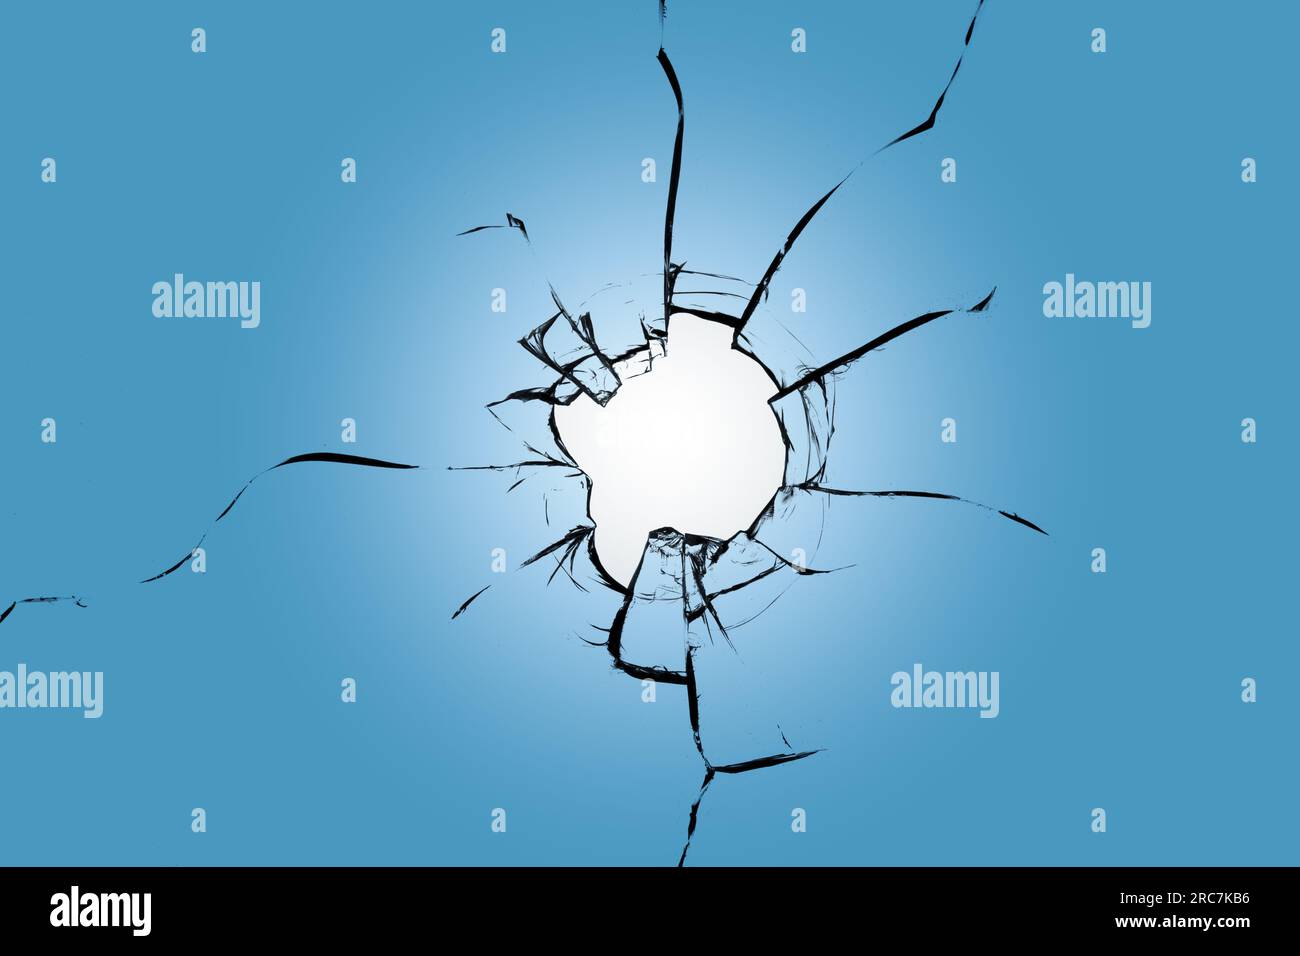 A broken window with cracks in the glass. Shatter effect for use in design Stock Photo